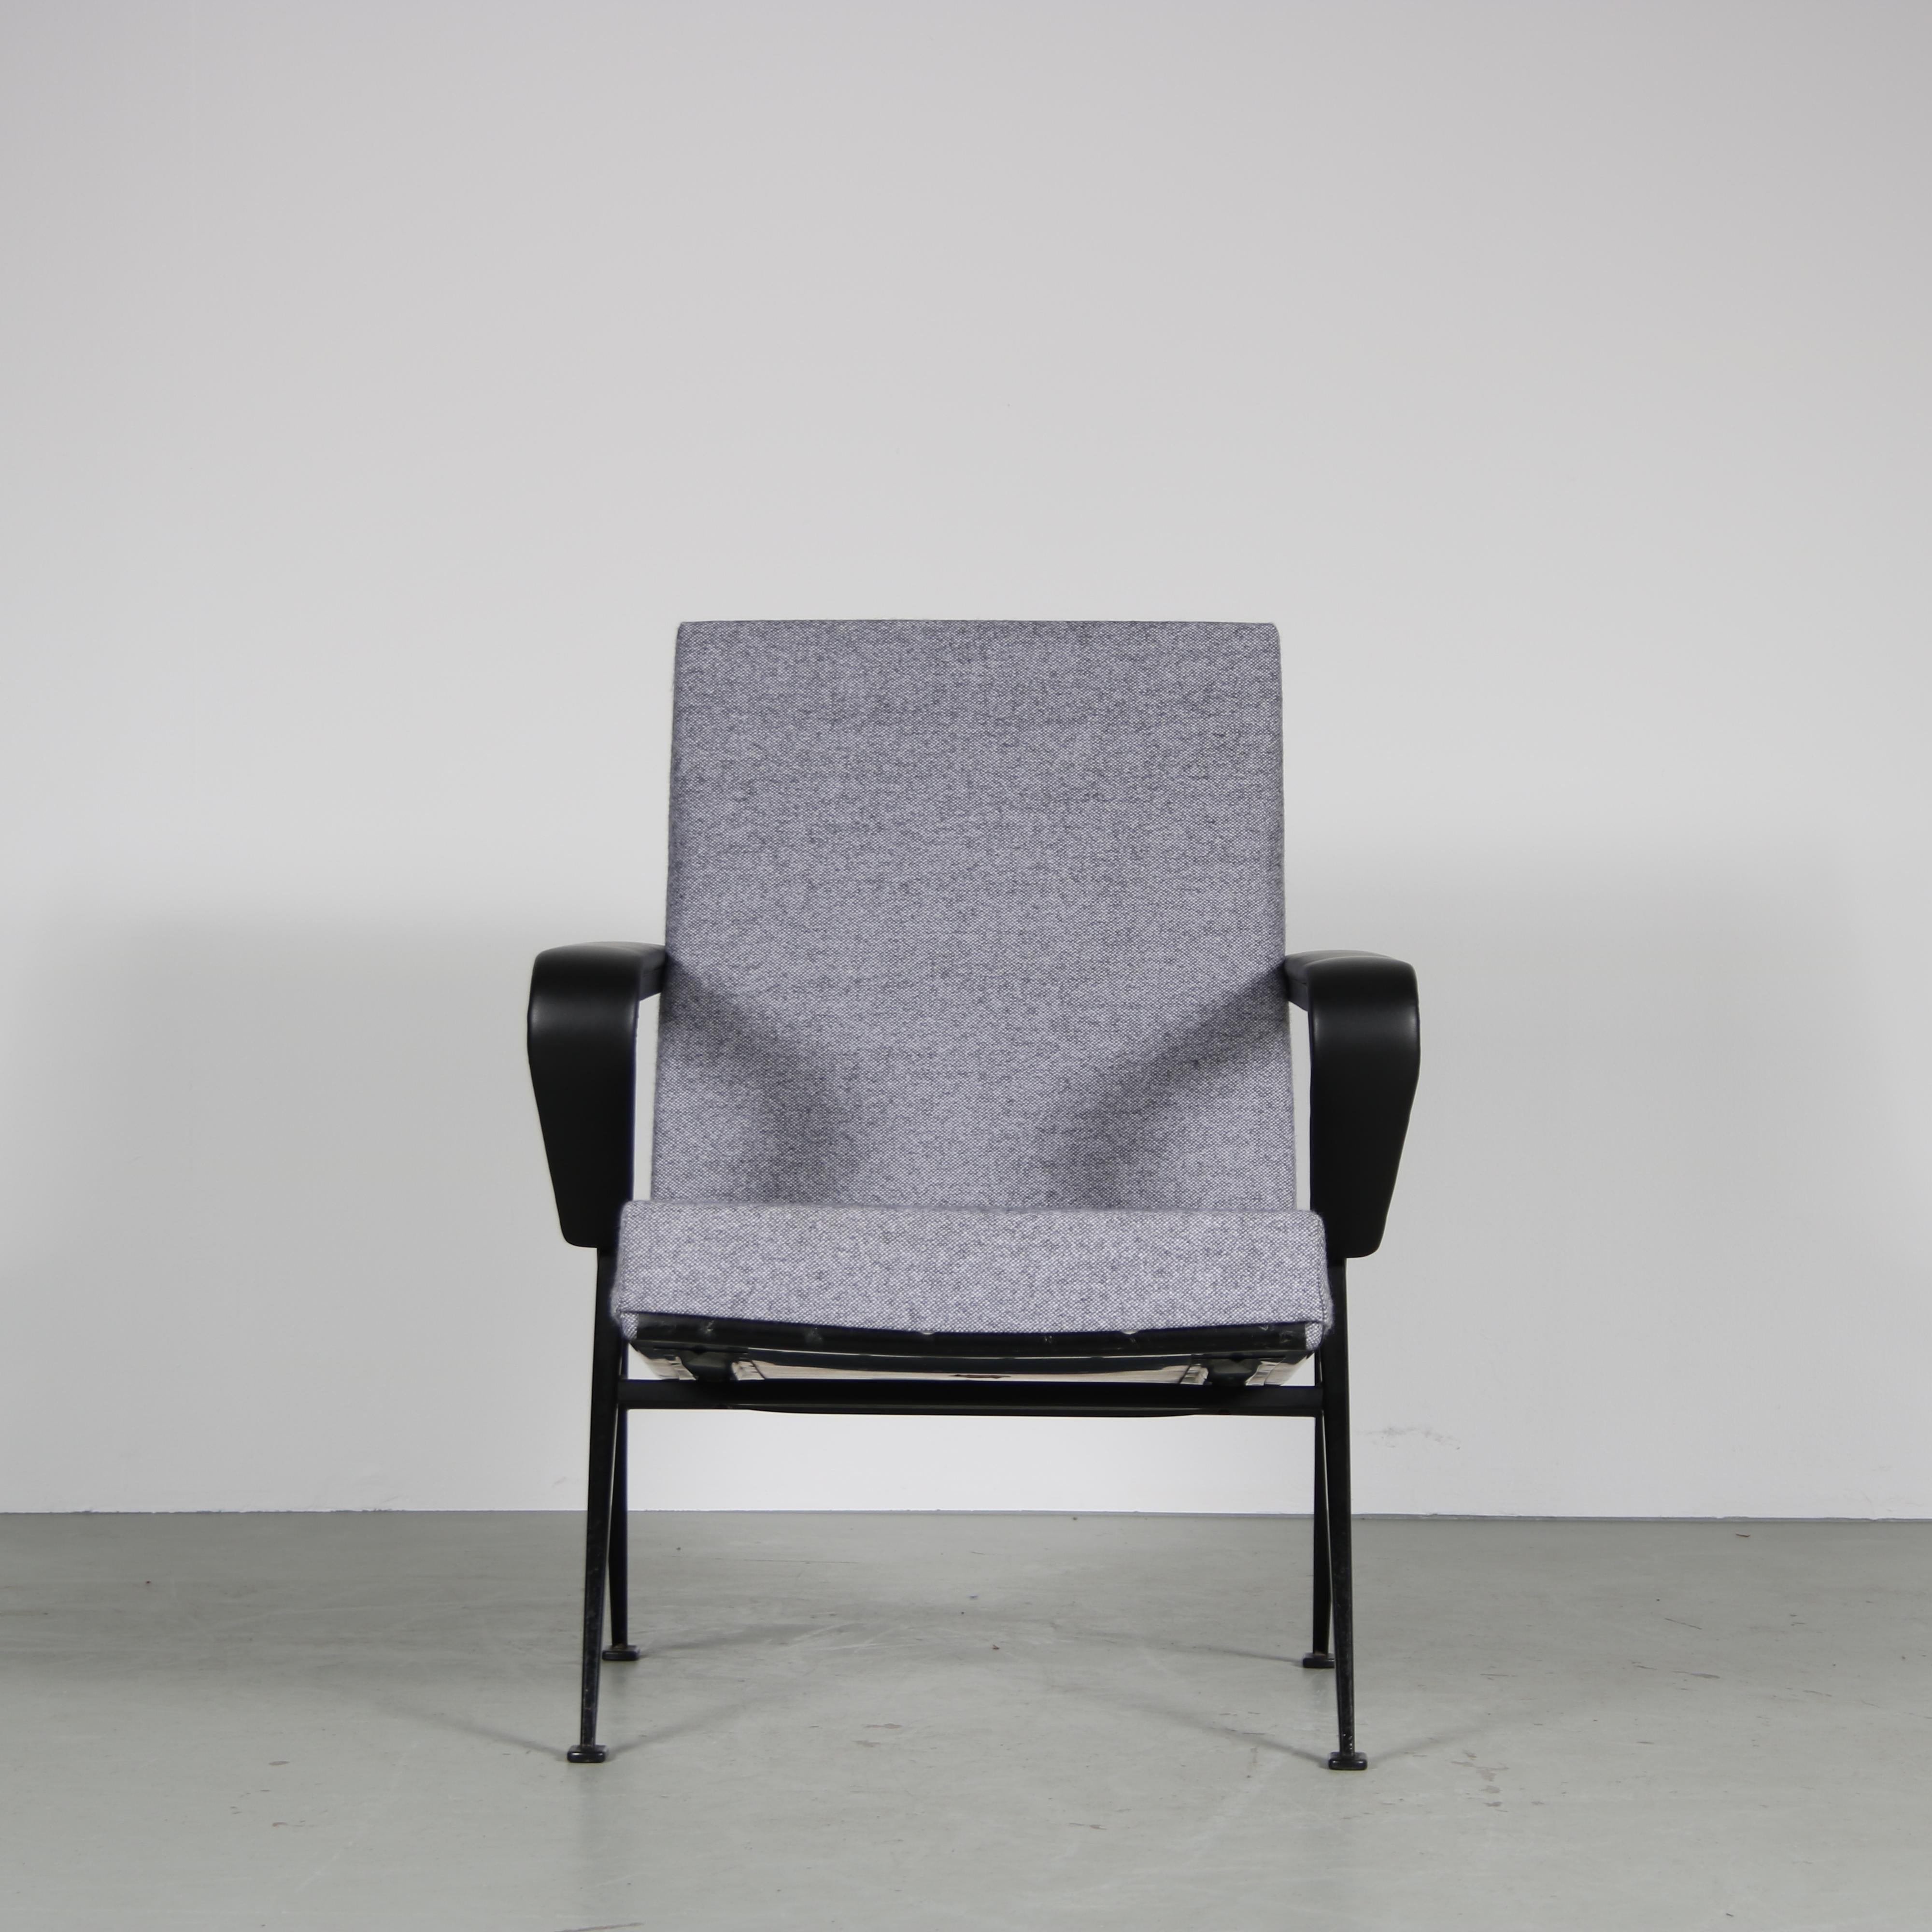 1960s “Repose” Chairs by Friso Kramer for Ahrend de Cirkel, Netherlands For Sale 1